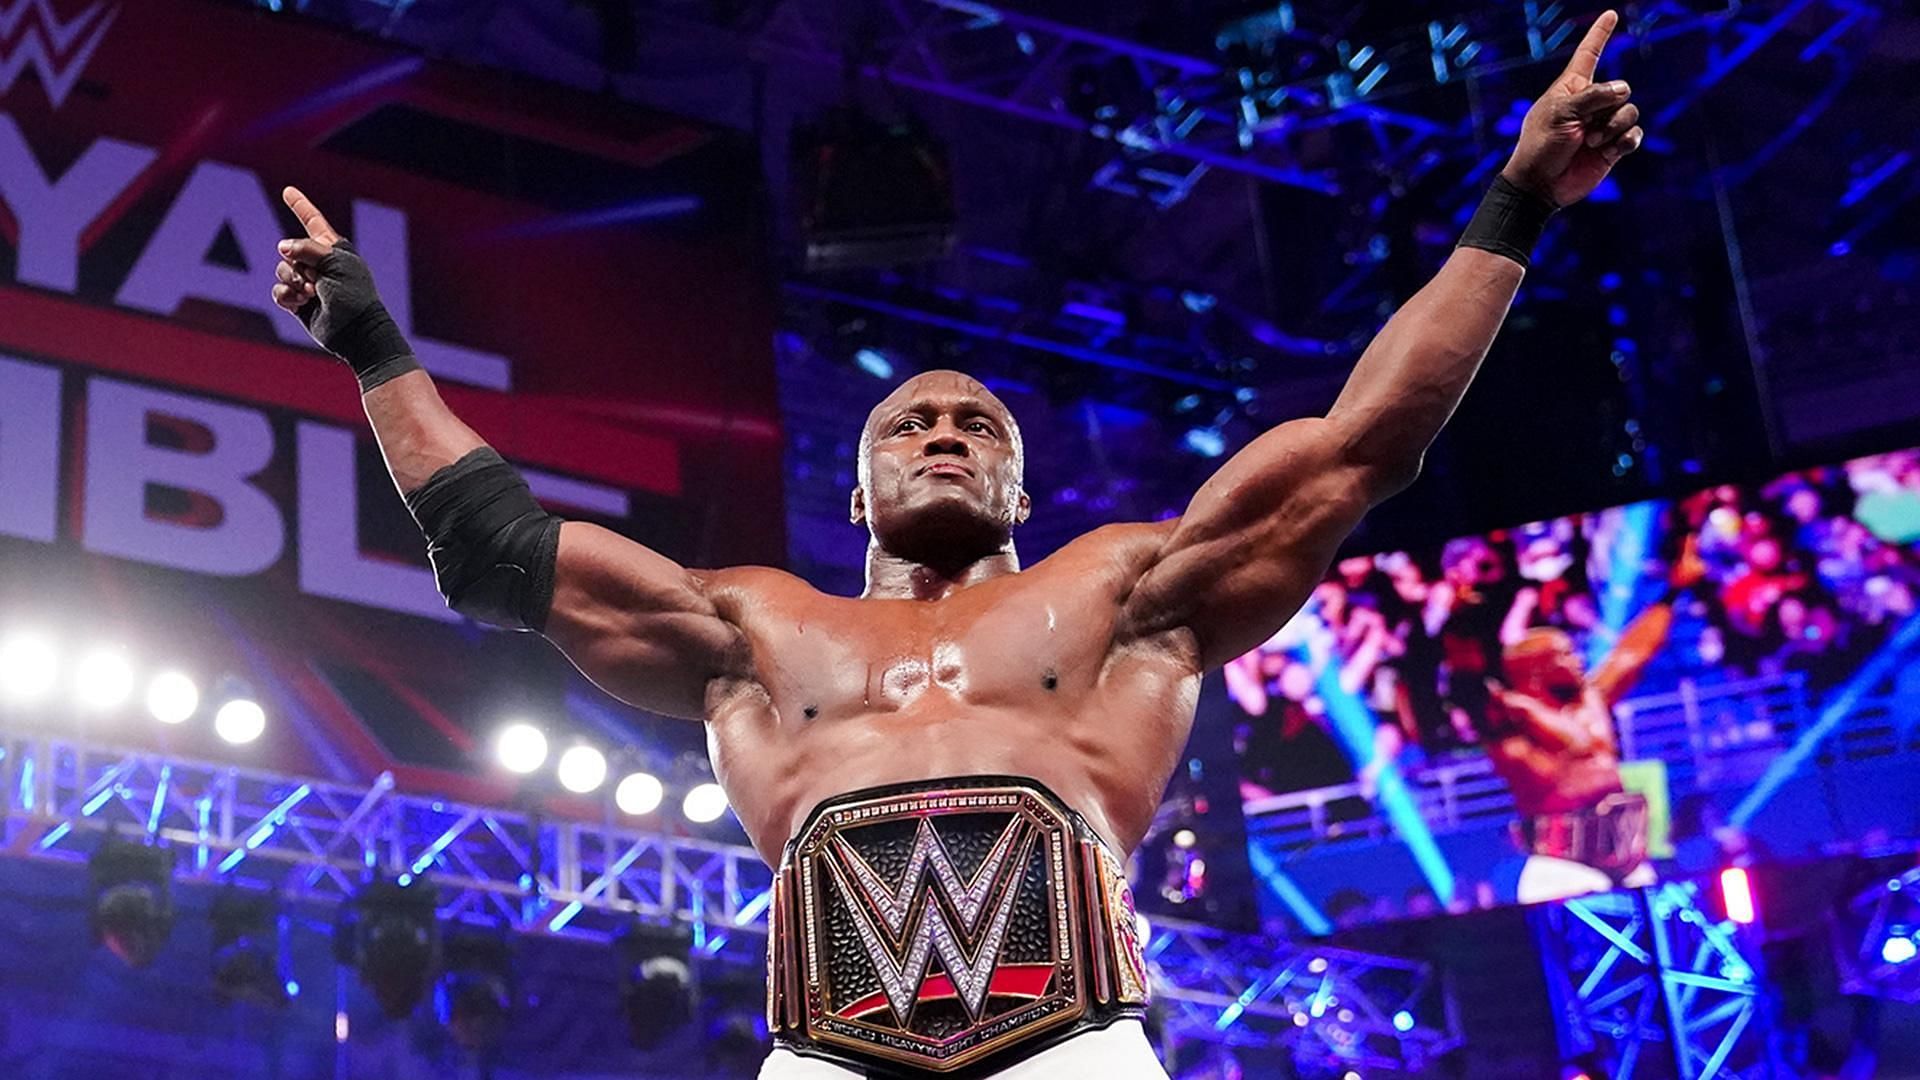 Bobby Lashley is the current WWE Champion.